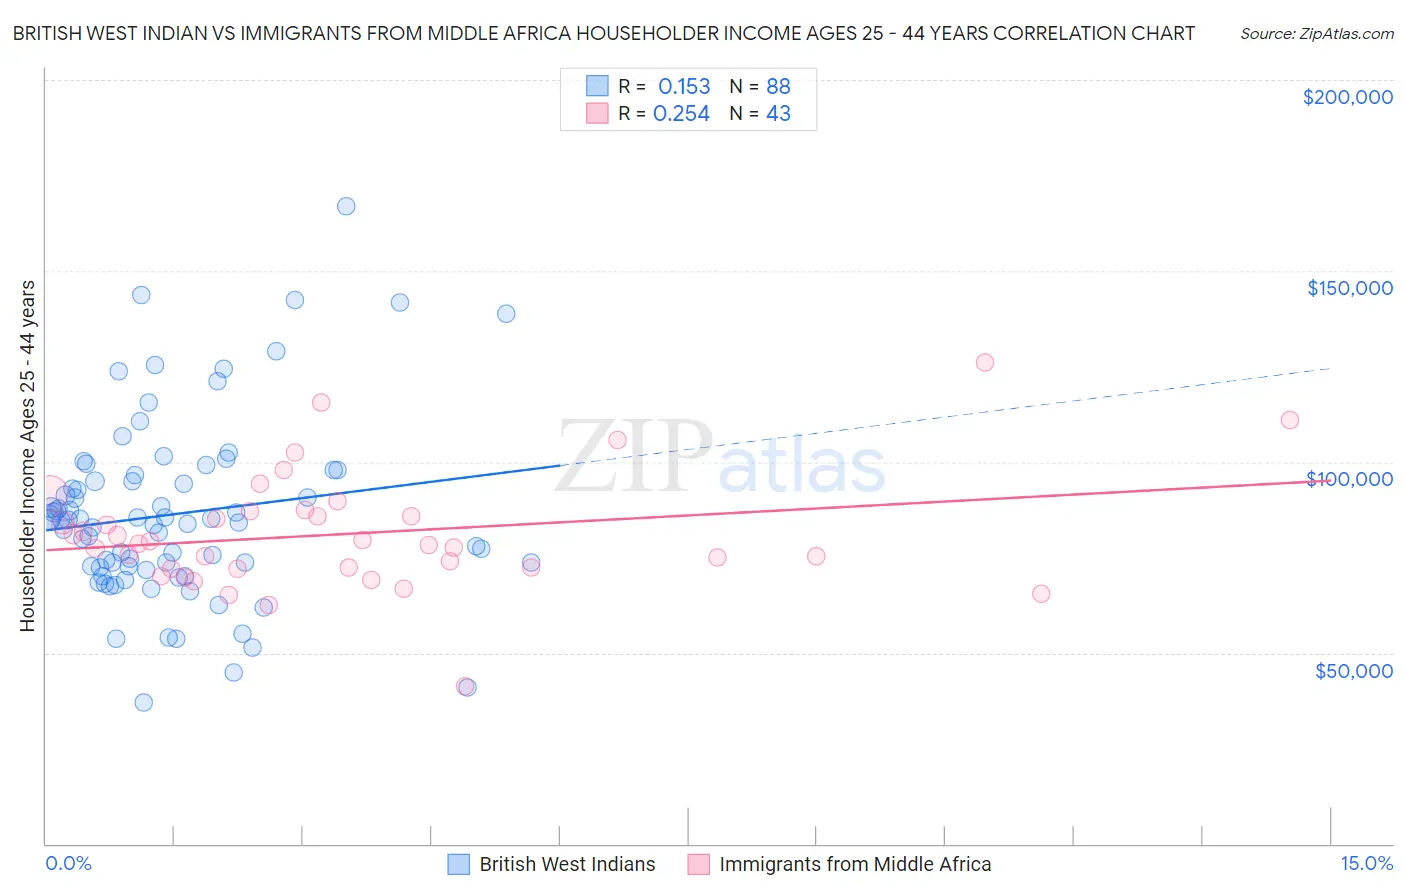 British West Indian vs Immigrants from Middle Africa Householder Income Ages 25 - 44 years